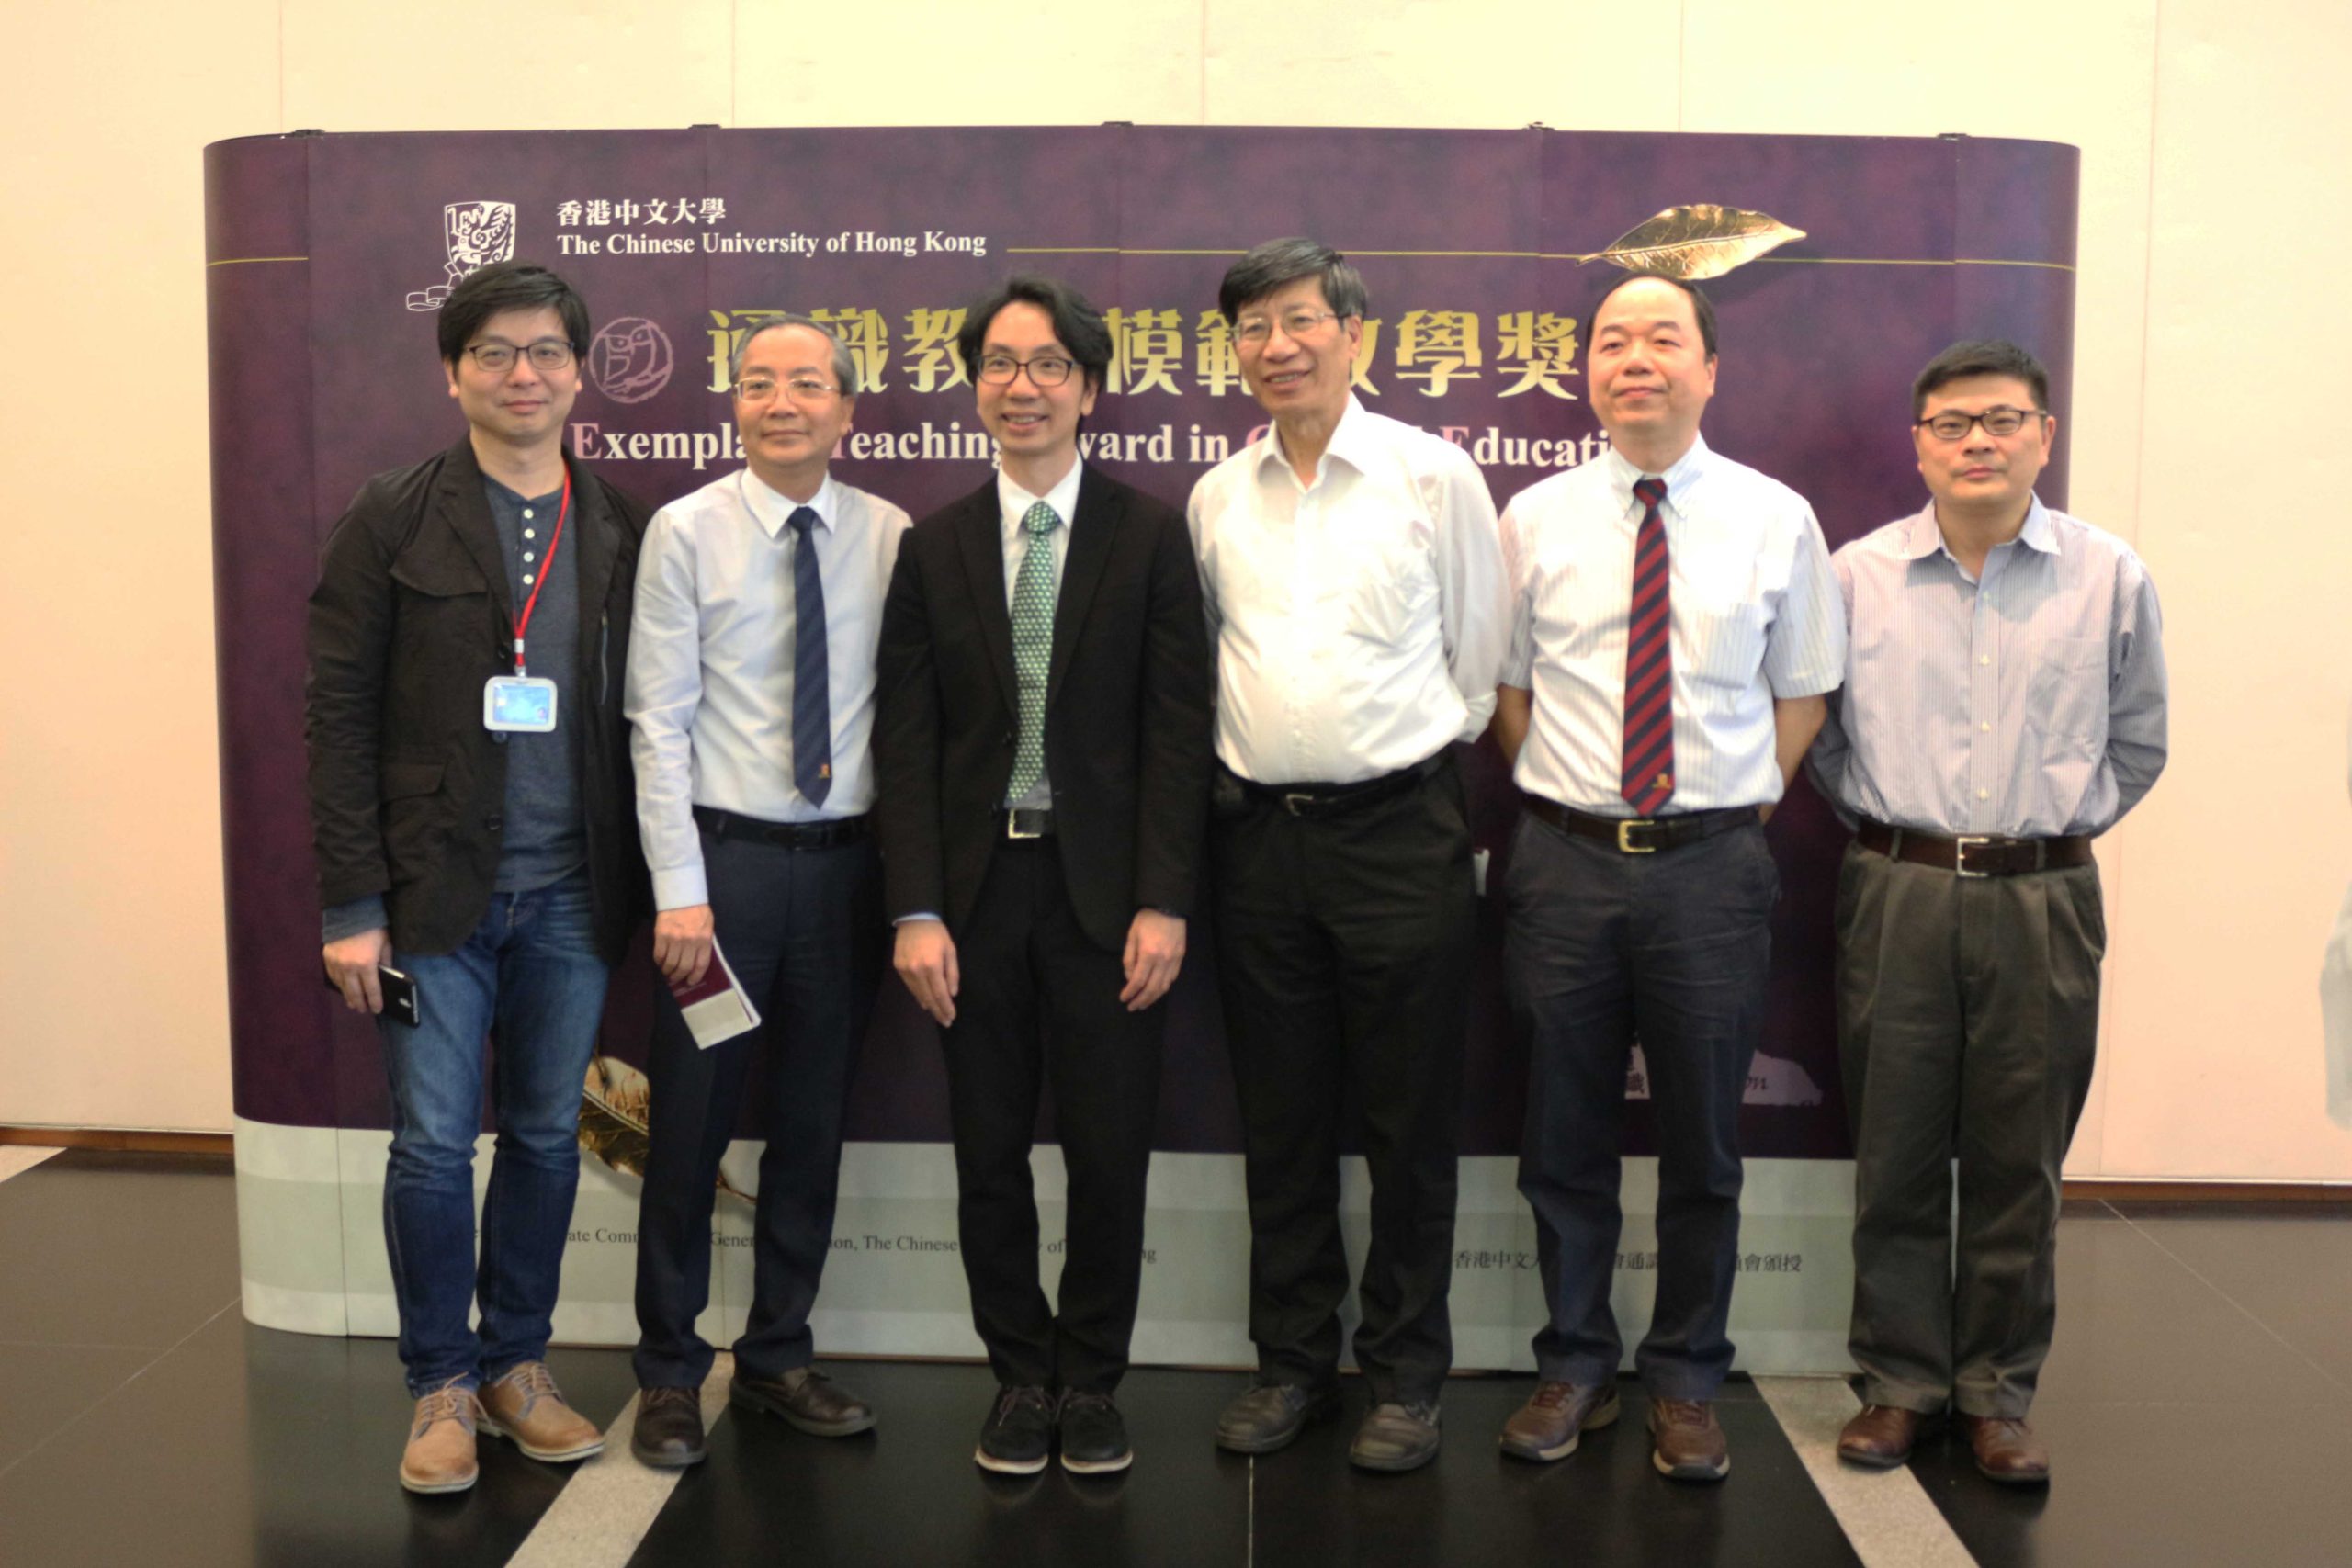 Dr. Tong Shiu Sing and his colleagues